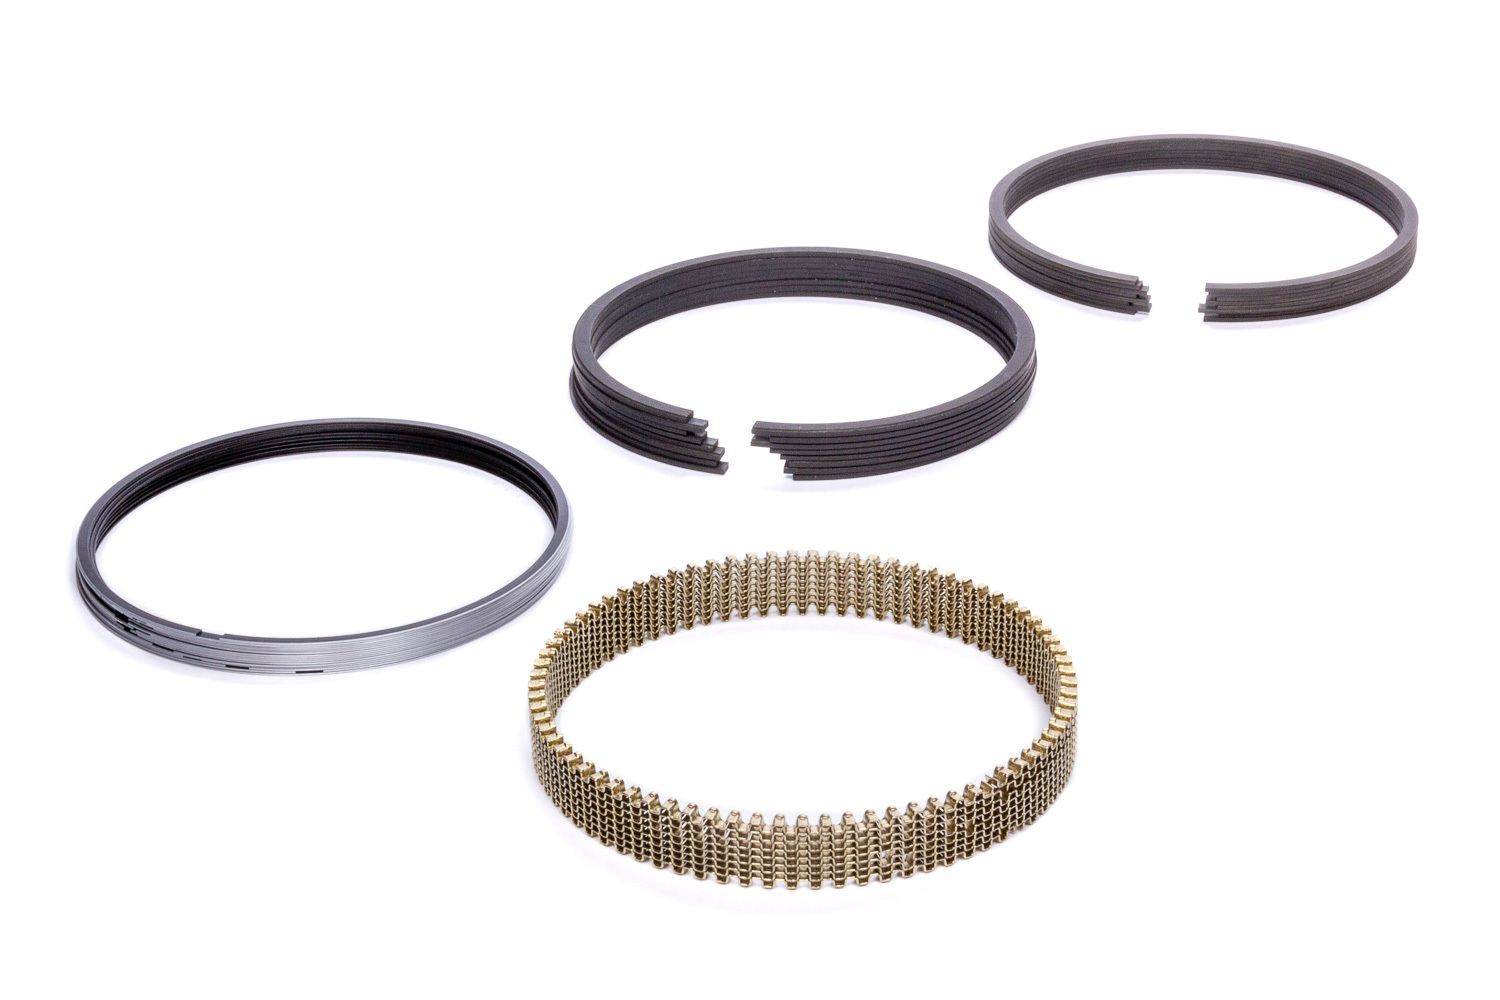 Hastings Piston Rings SN9065 Piston Rings, Premium Ductile and Steel Series, 4.000 in Bore, Drop In, 1.2 x 1.5 x 3.0 mm Thick, Standard Tension, Stainless Steel, Gas Nitride, 8-Cylinder, Kit